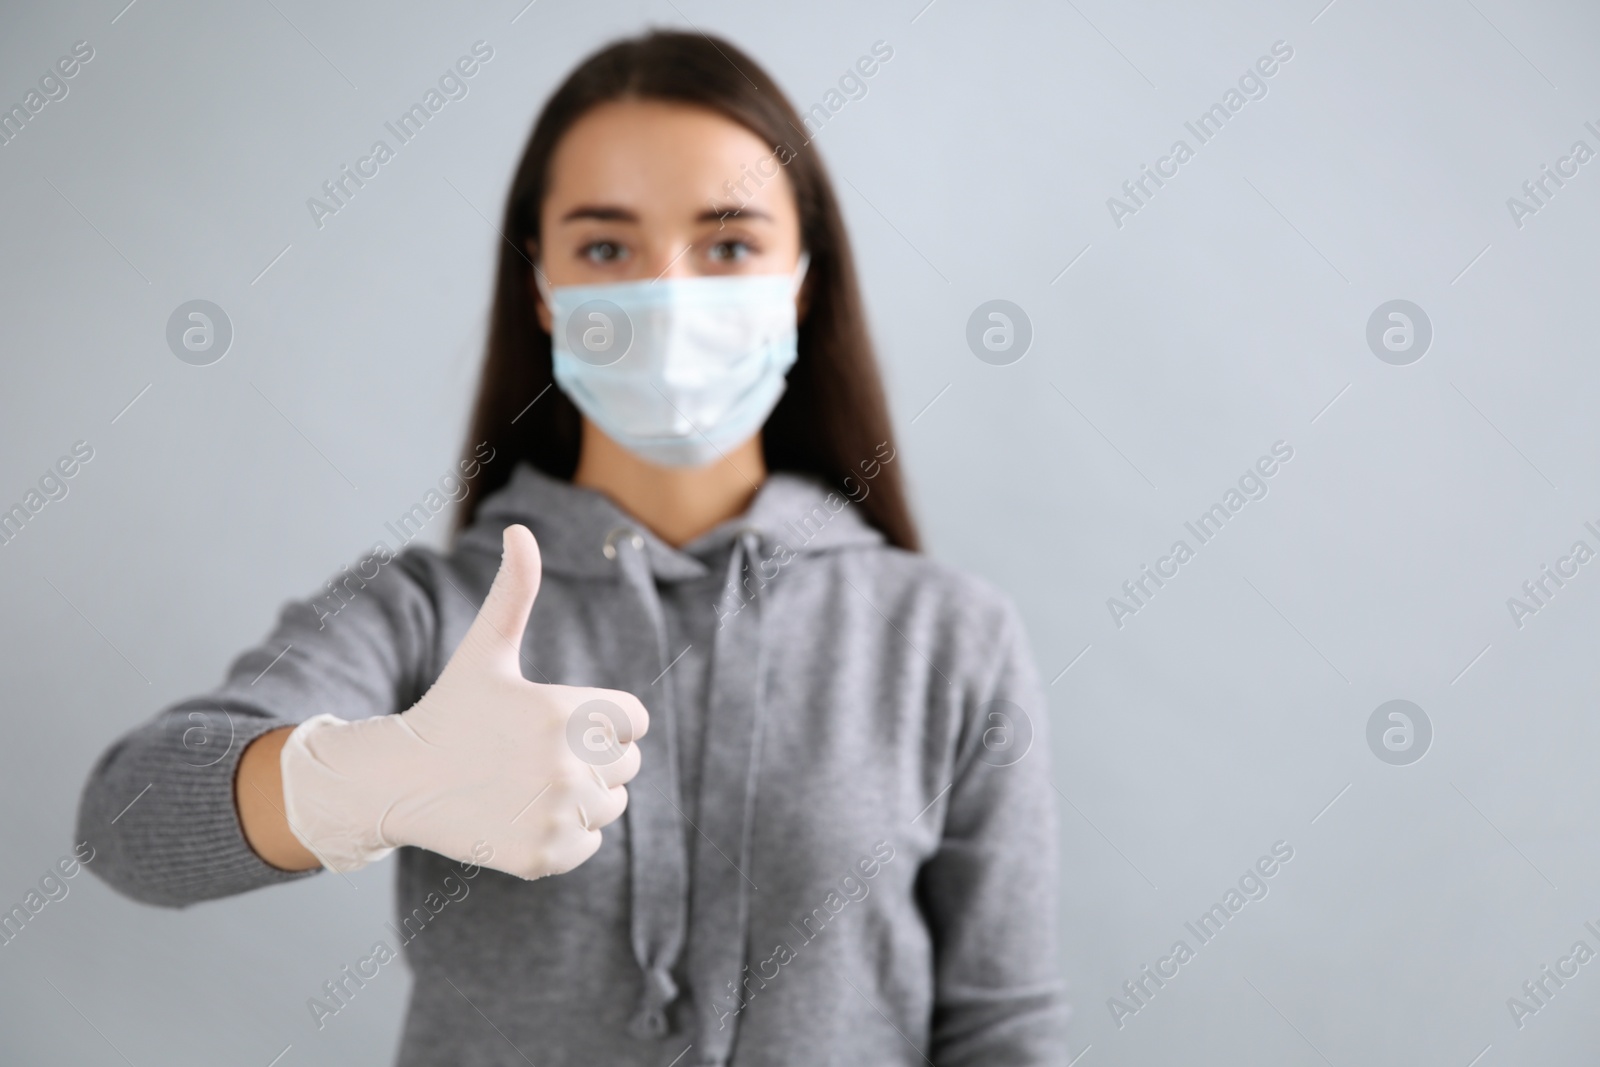 Photo of Woman in protective face mask and medical gloves showing thumb up gesture on grey background. Space for text